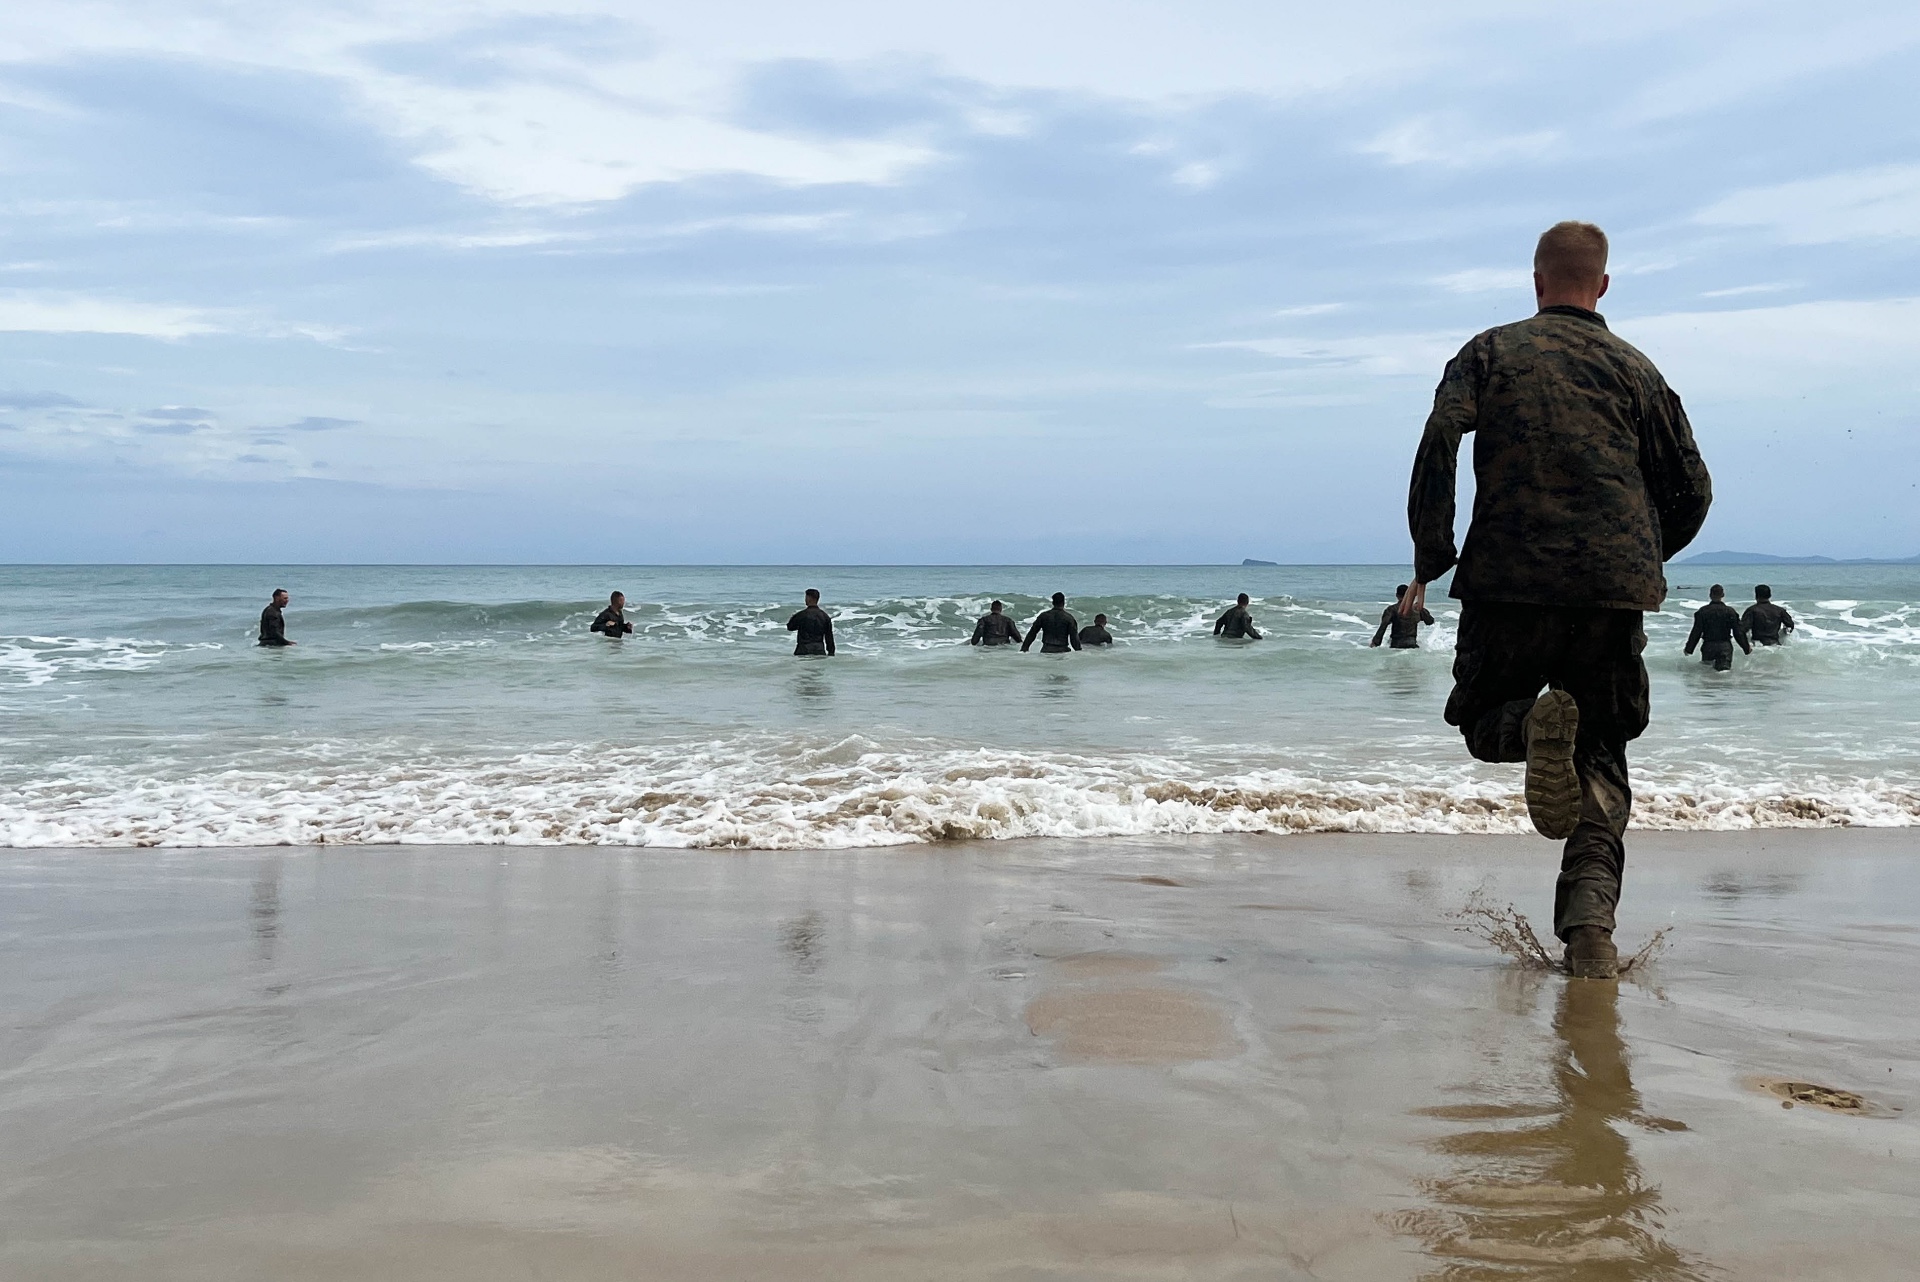 U.S. Marines with 2nd Battalion, 5th Marine Regiment, 1st Marine Division, run into the ocean during Marine Aviation Support Activity (MASA) 23 in Palawan, Philippines, July 16, 2023.